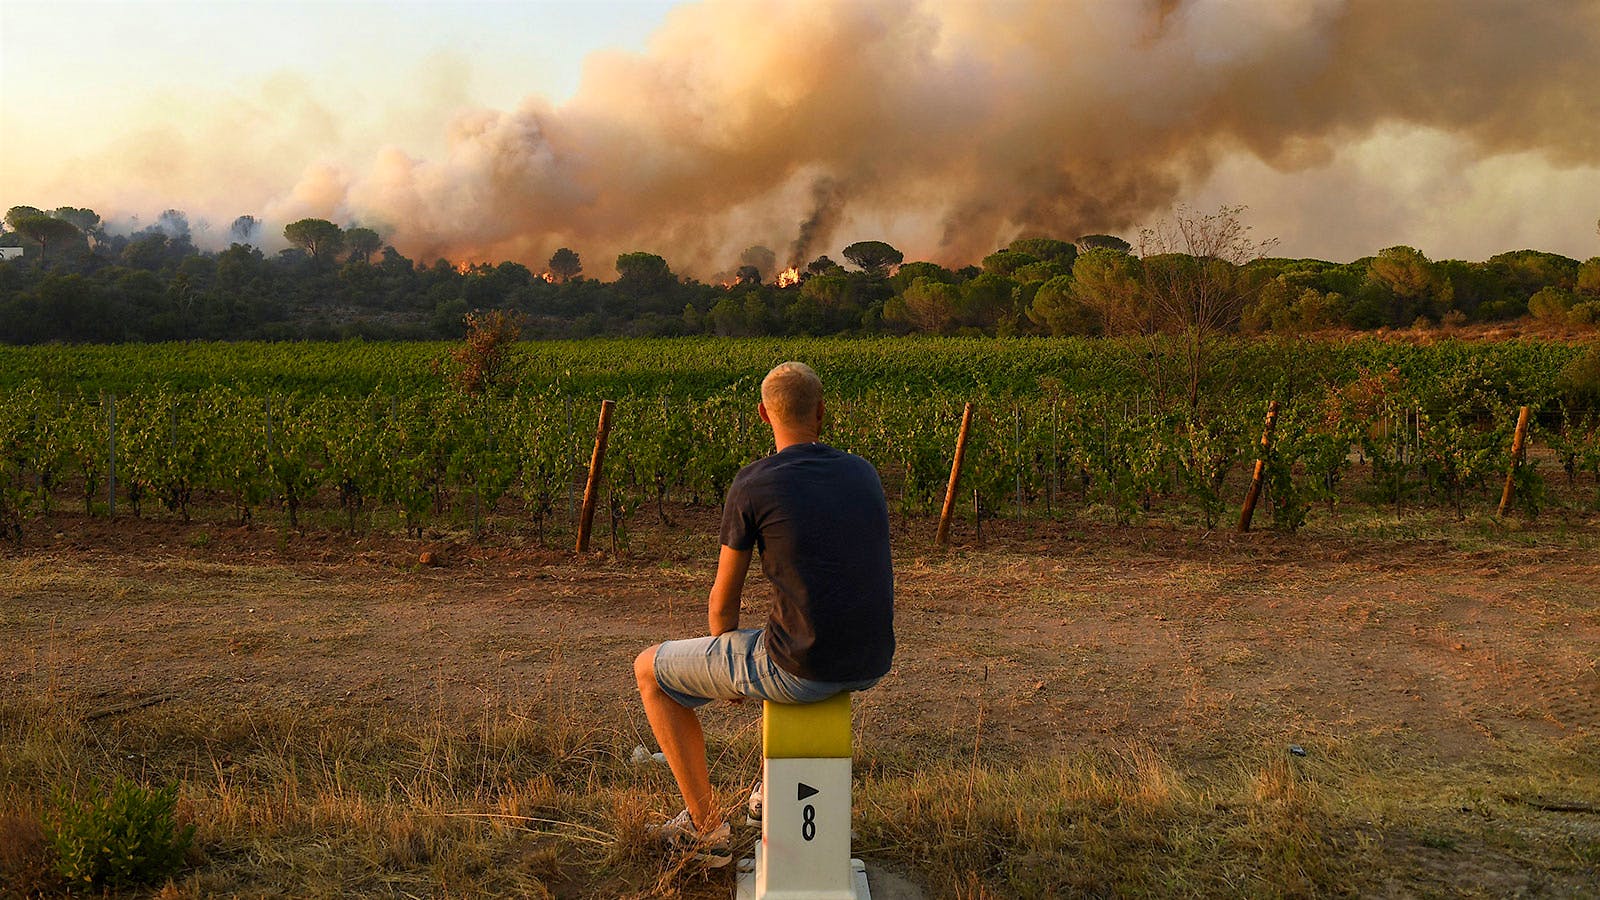 Provence Winemakers Return Home to Charred Vines and Fears of Smoke Taint